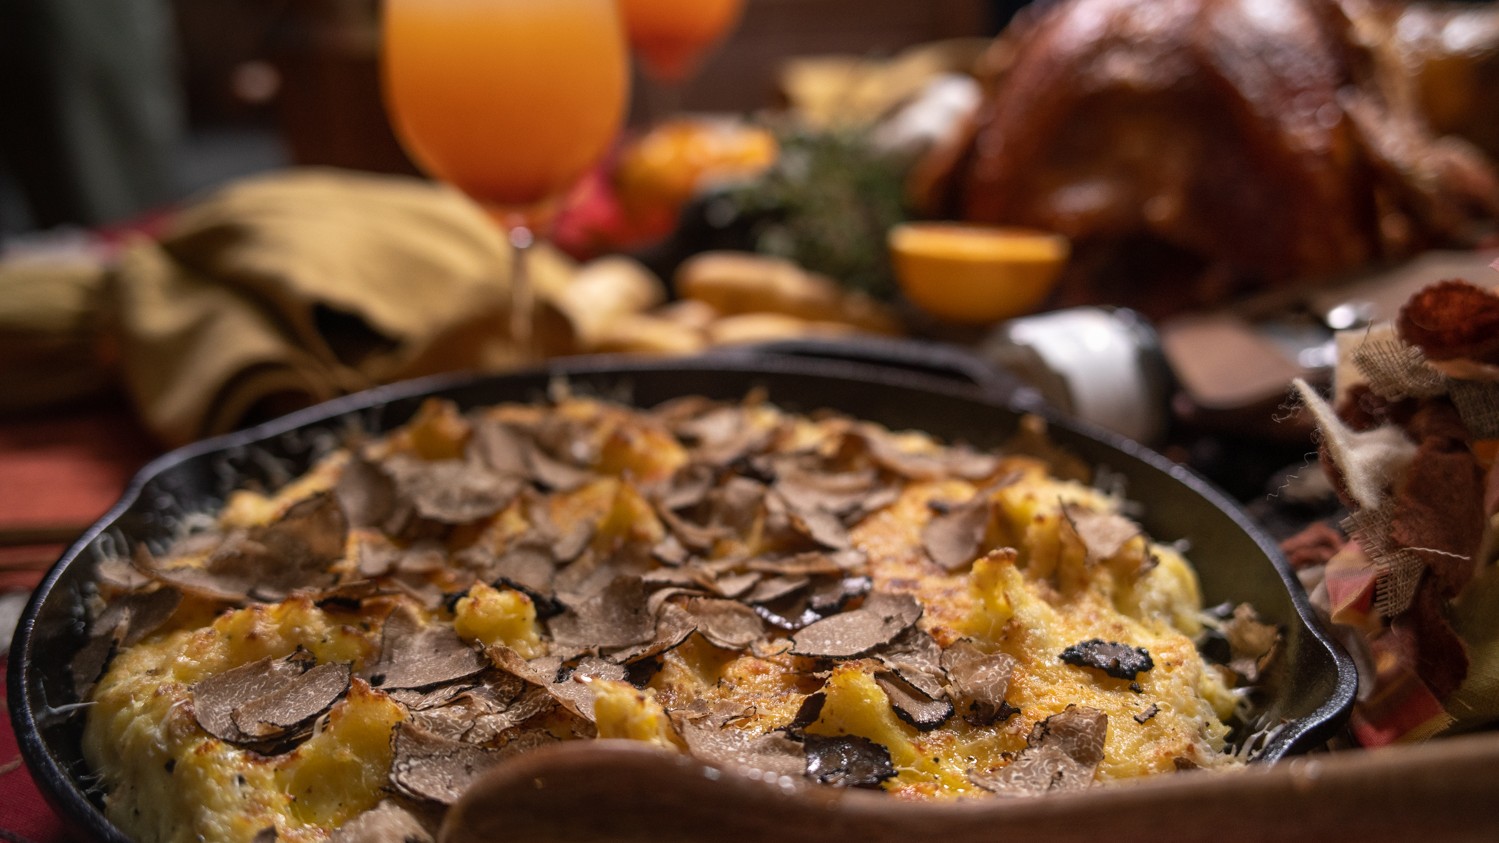 Image of Chef Tyler’s Whipped Potato Casserole with Farmer’s Cheese, Buttermilk, and Truffles